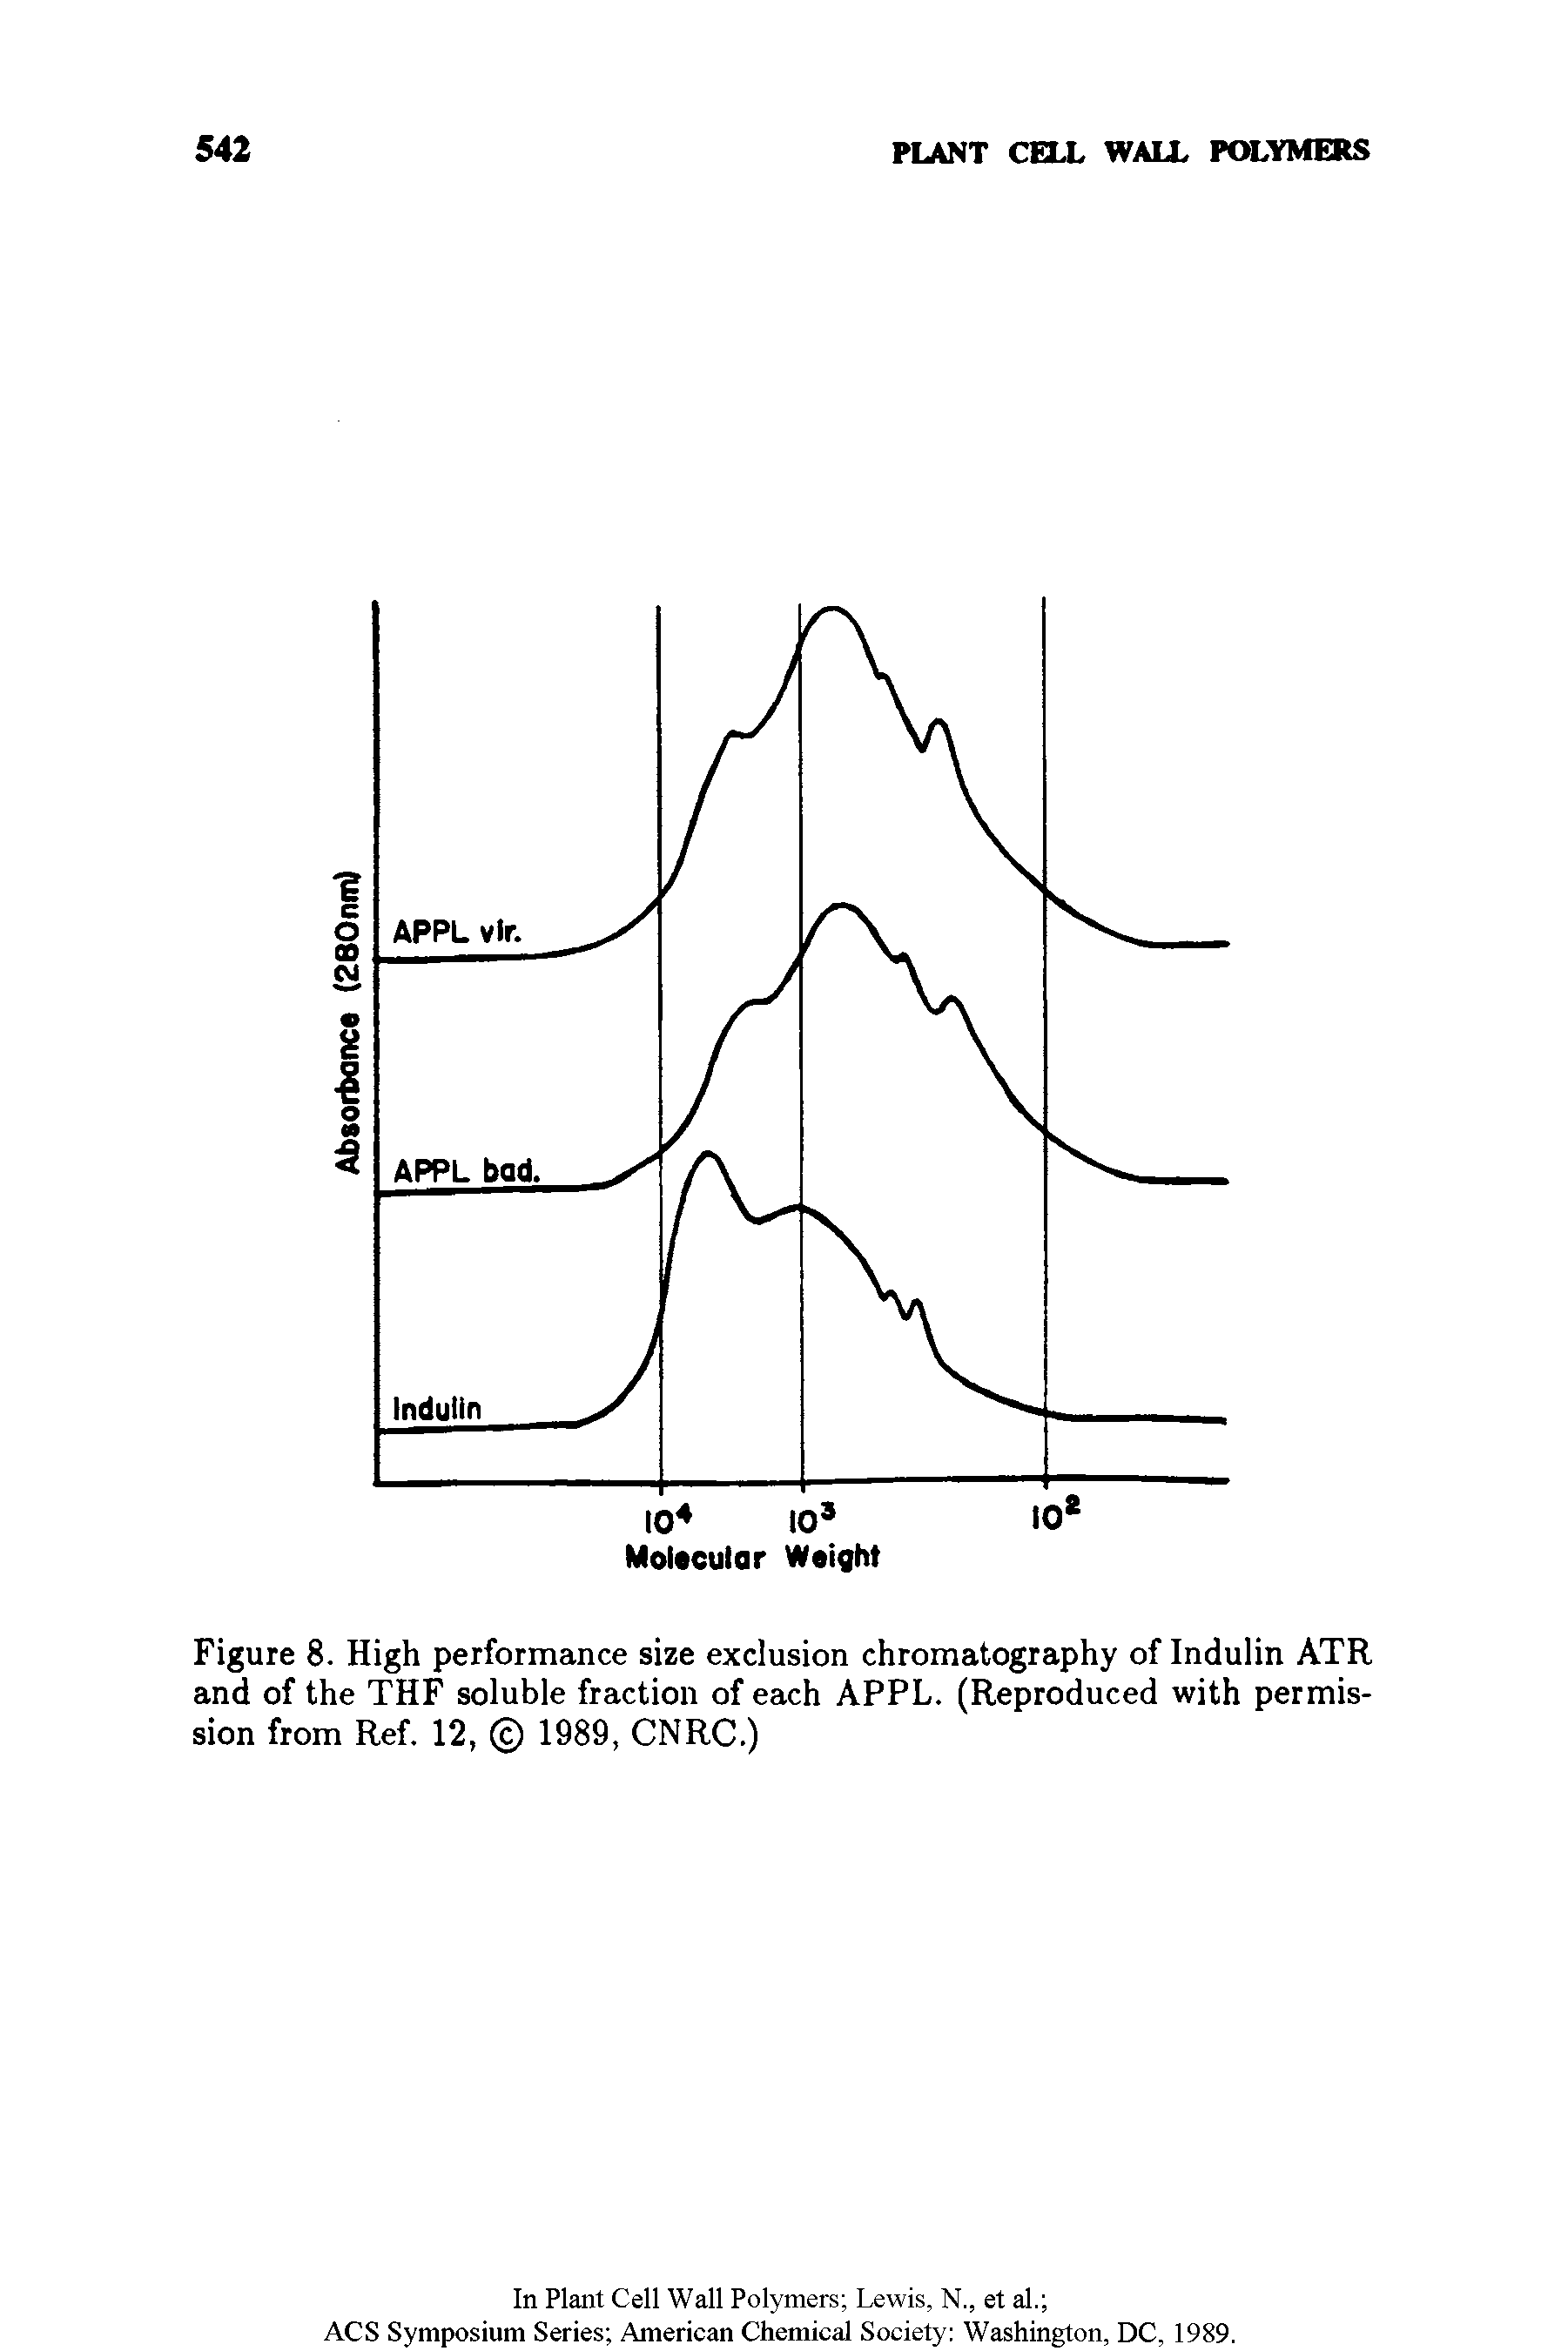 Figure 8. High performance size exclusion chromatography of Indulin ATR and of the THF soluble fraction of each APPL. (Reproduced with permission from Ref. 12, 1989, CNRC.)...